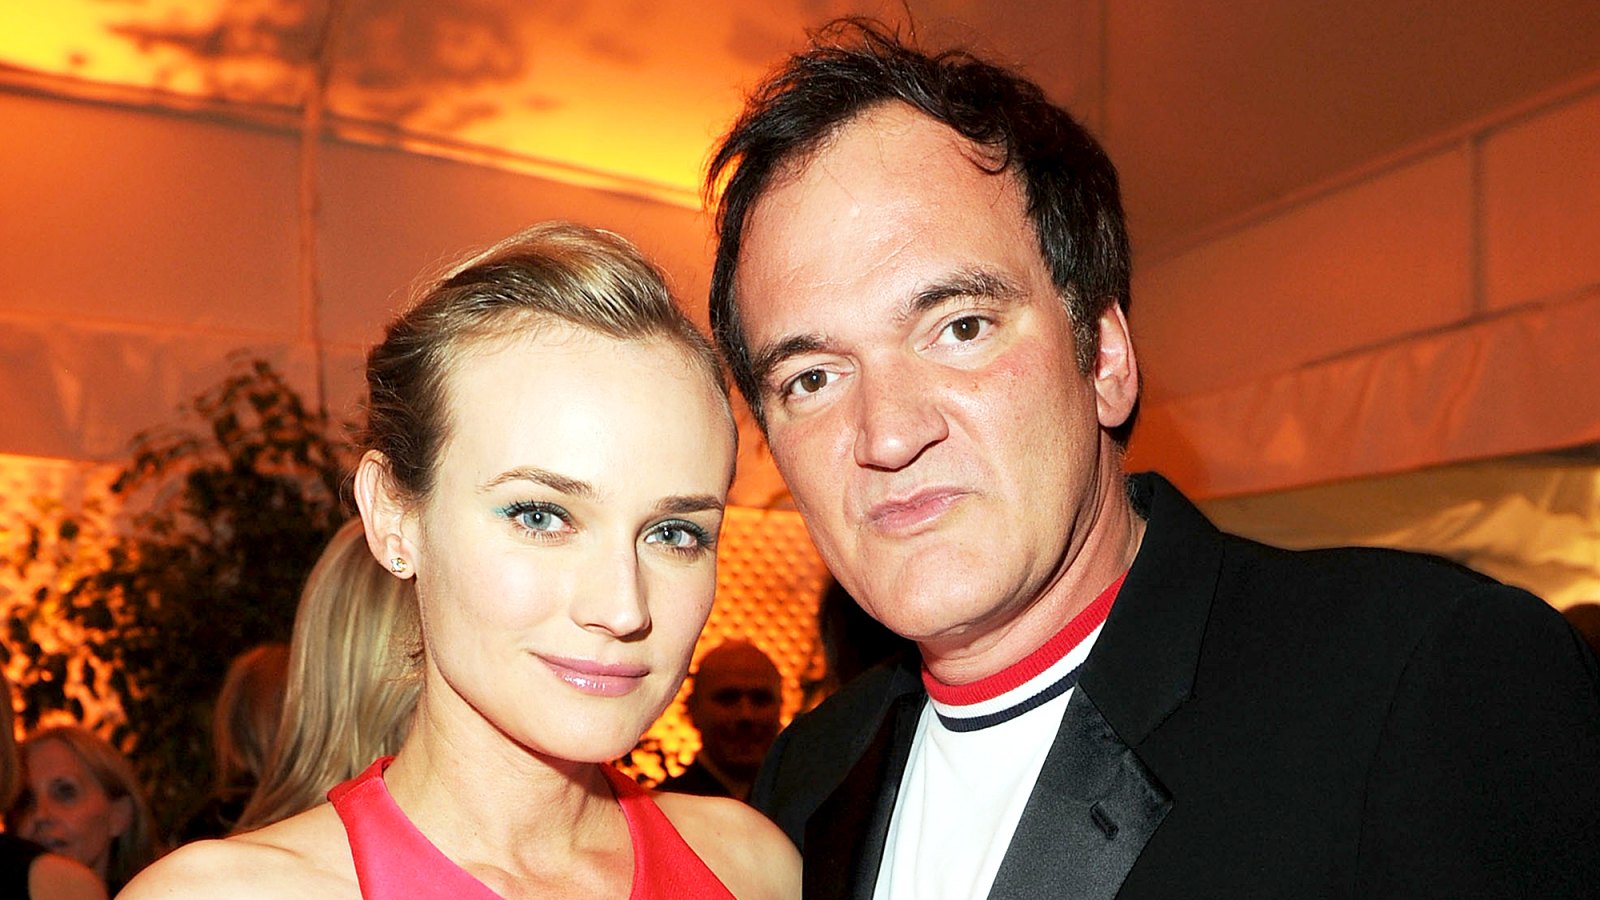 Diane Kruger and Quentin Tarantino attend ELLE's 17th Annual Women in Hollywood Tribute at The Four Seasons Hotel in Beverly Hills, California.